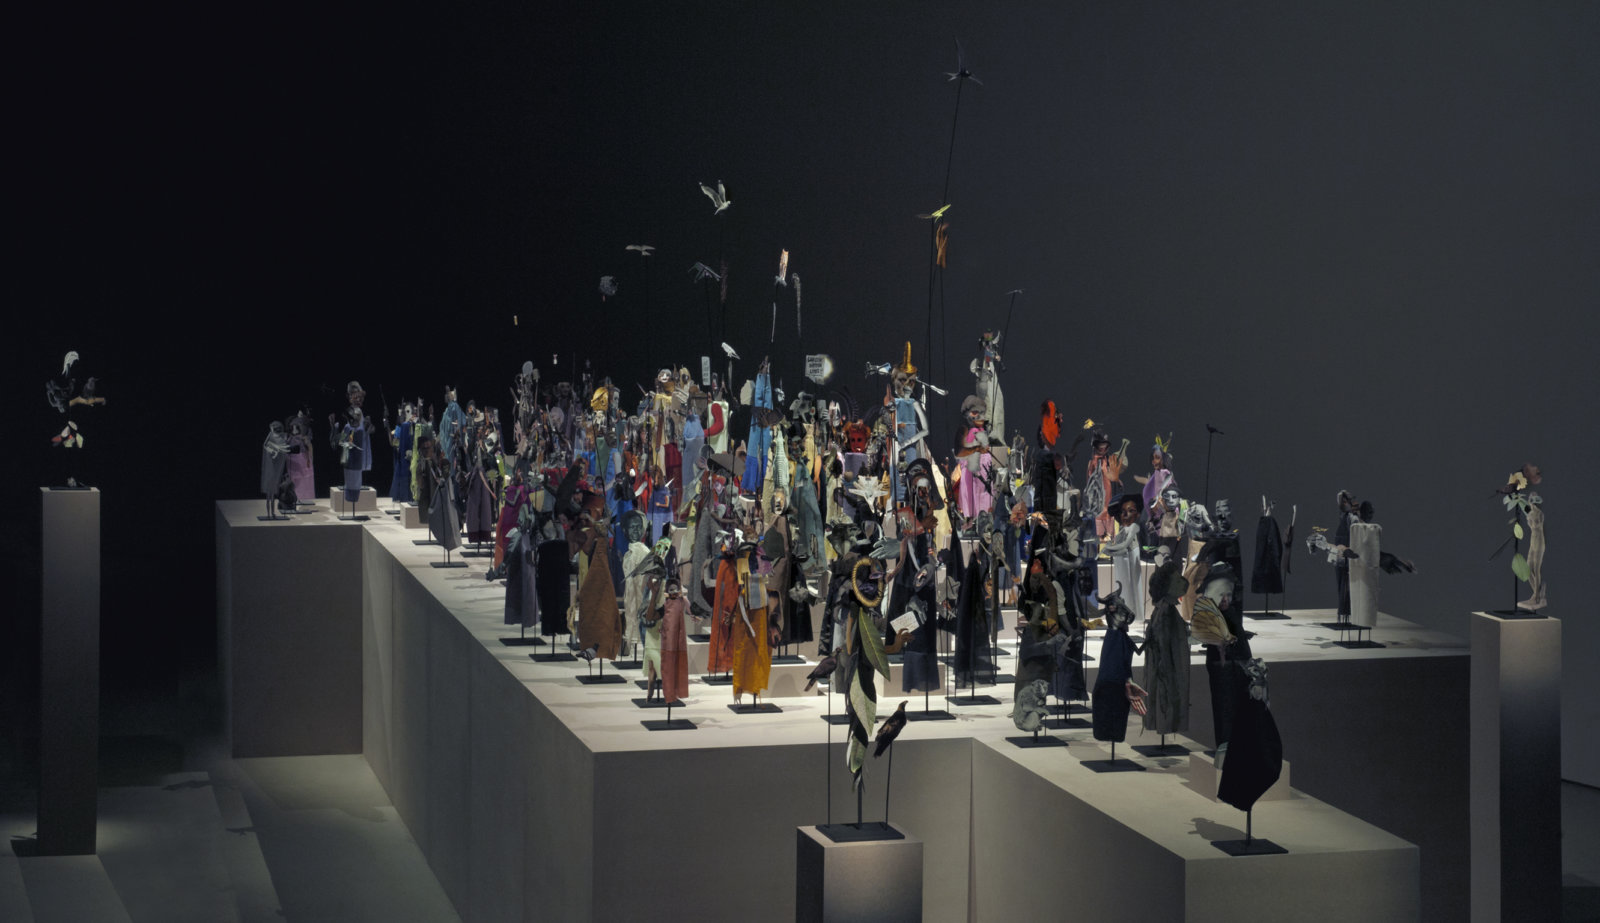 Geoffrey Farmer, The Surgeon and the Photographer, 2009, paper, textile, wood, and metal, 365 figures, dimensions variable. Installation view, Barbican Centre, London, 2013